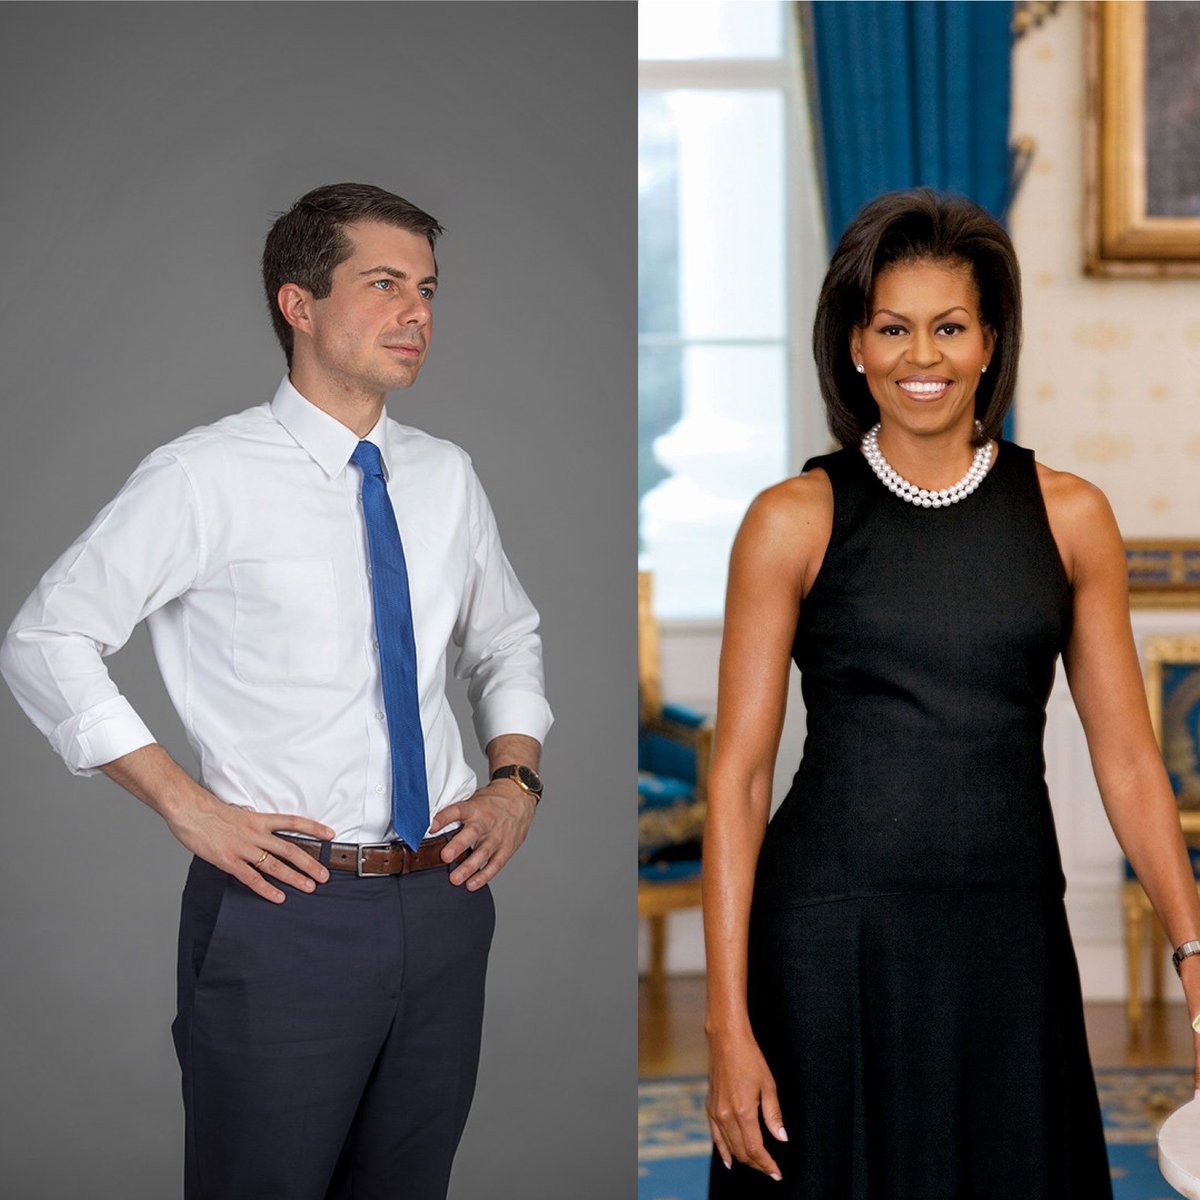 If Joe Biden dropped out of the 2024 race would you support a Pete Buttigieg and Michelle Obama ticket, Yea or Nay? ✋💙